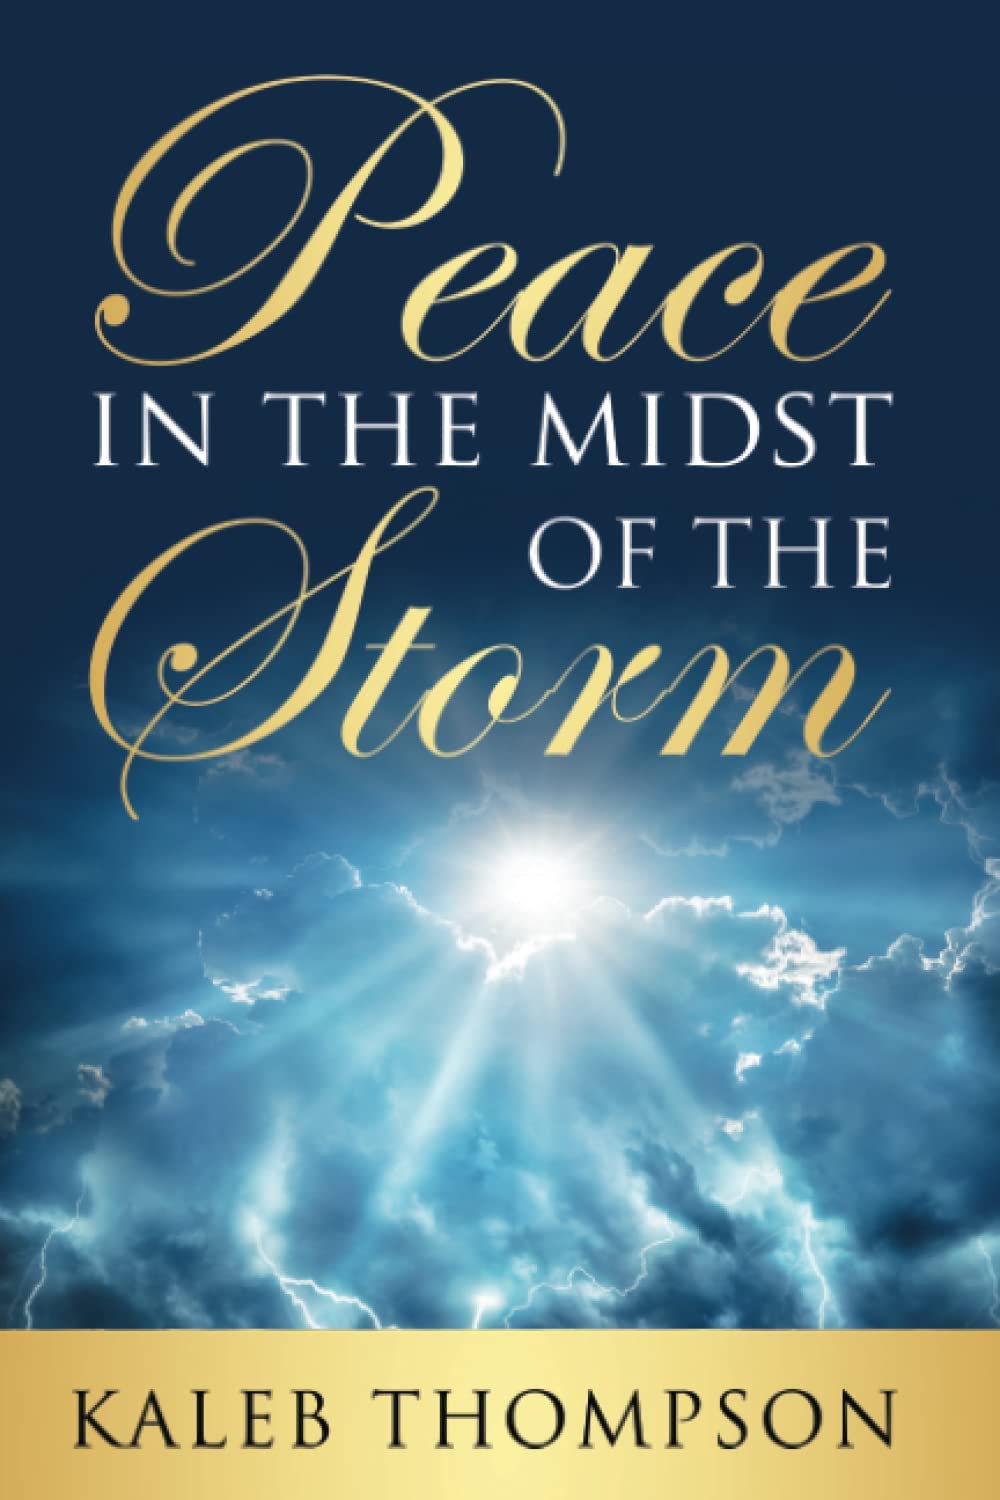 PEACE IN THE MODST OF THE STORM by Kaleb Thompson